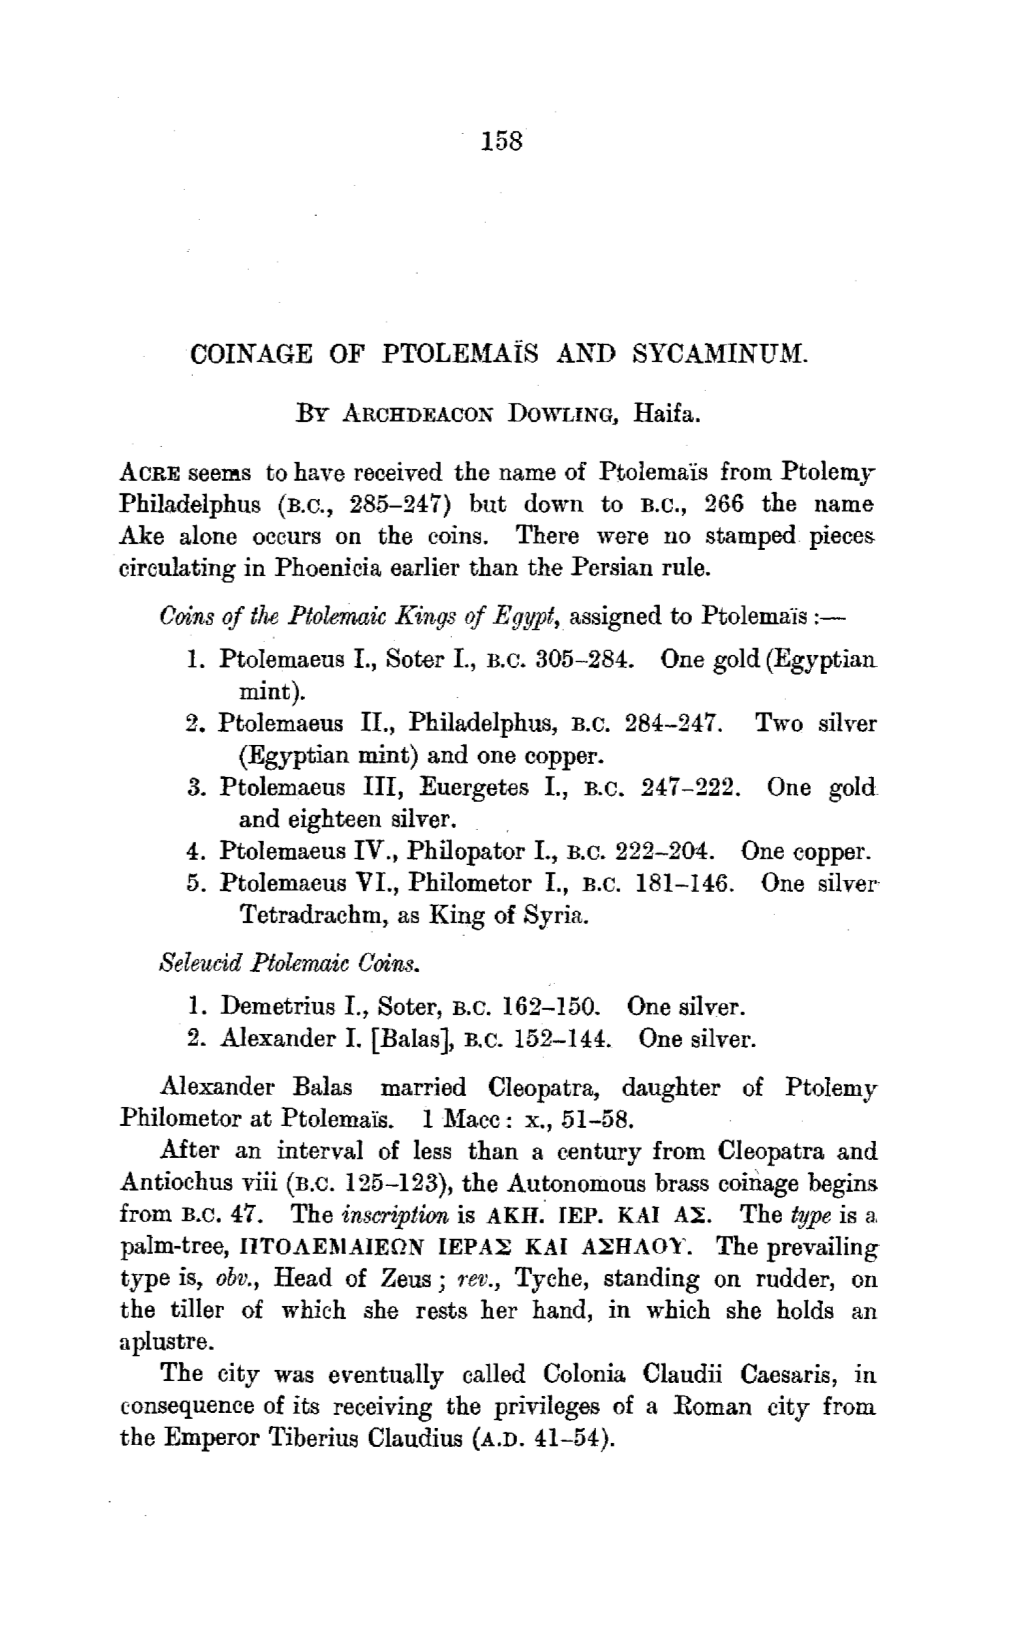 Coinage of Ptolemais and Sycaminum